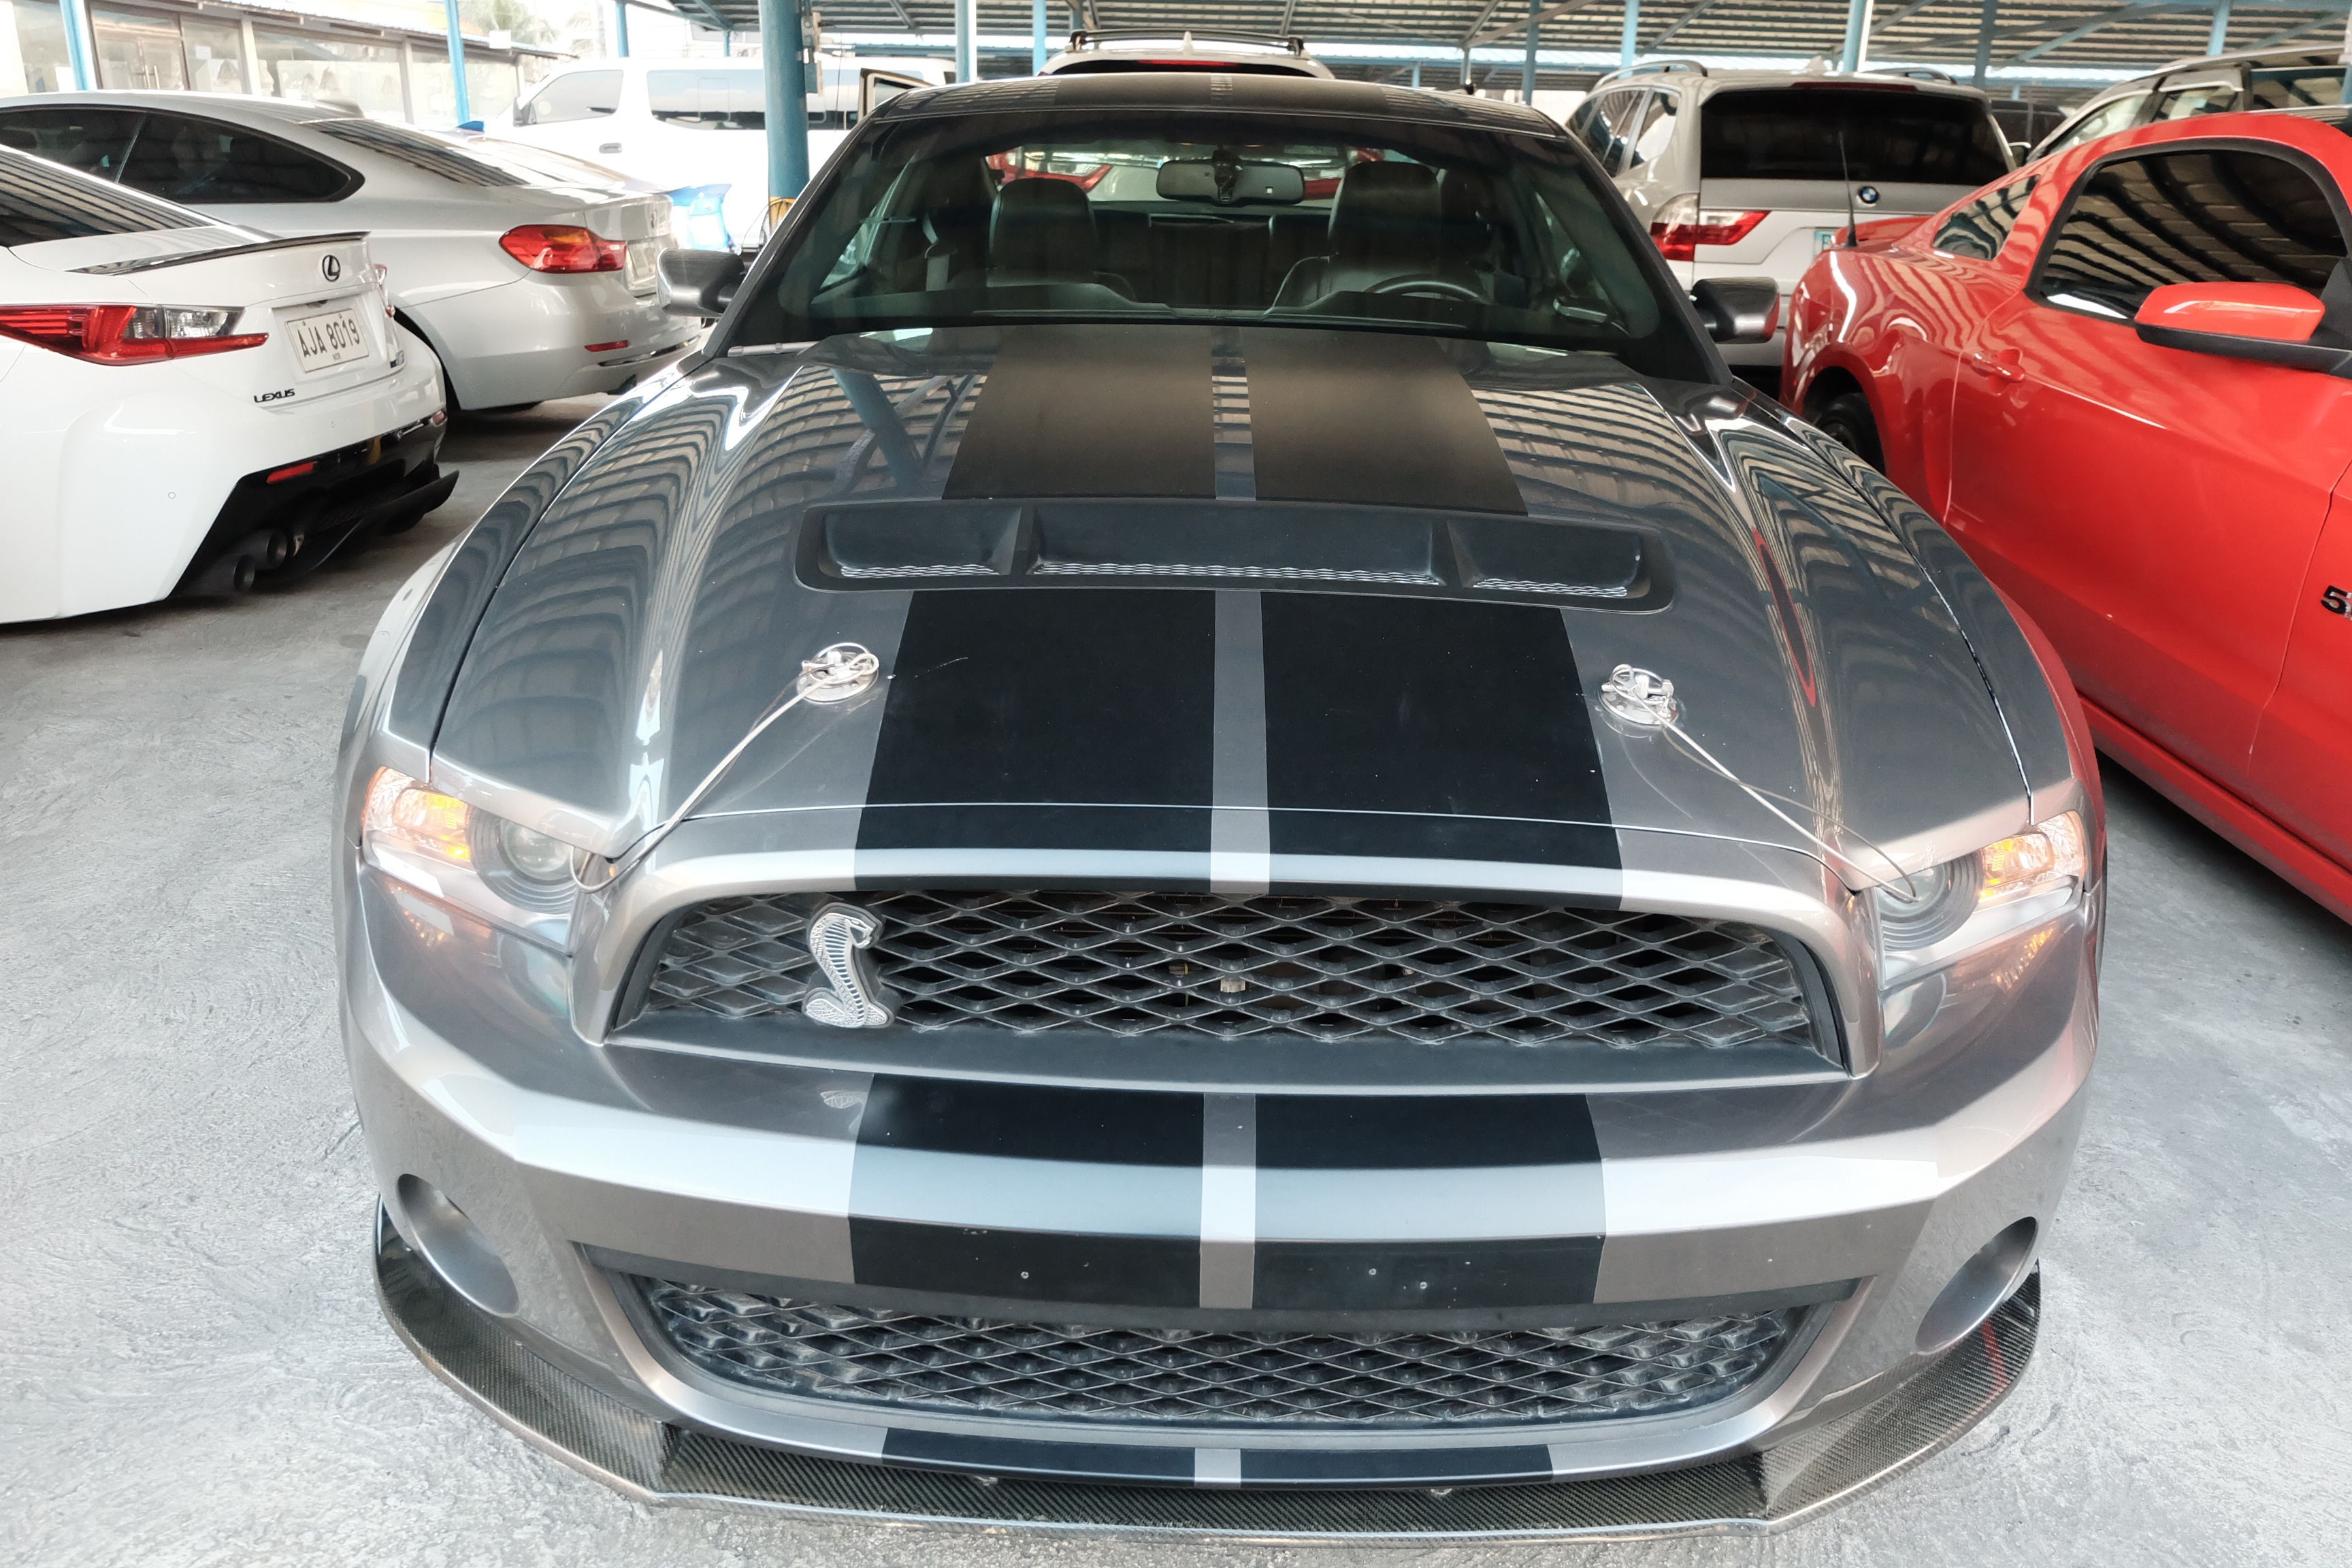 Used 2011 Shelby Mustang 5.0L AT